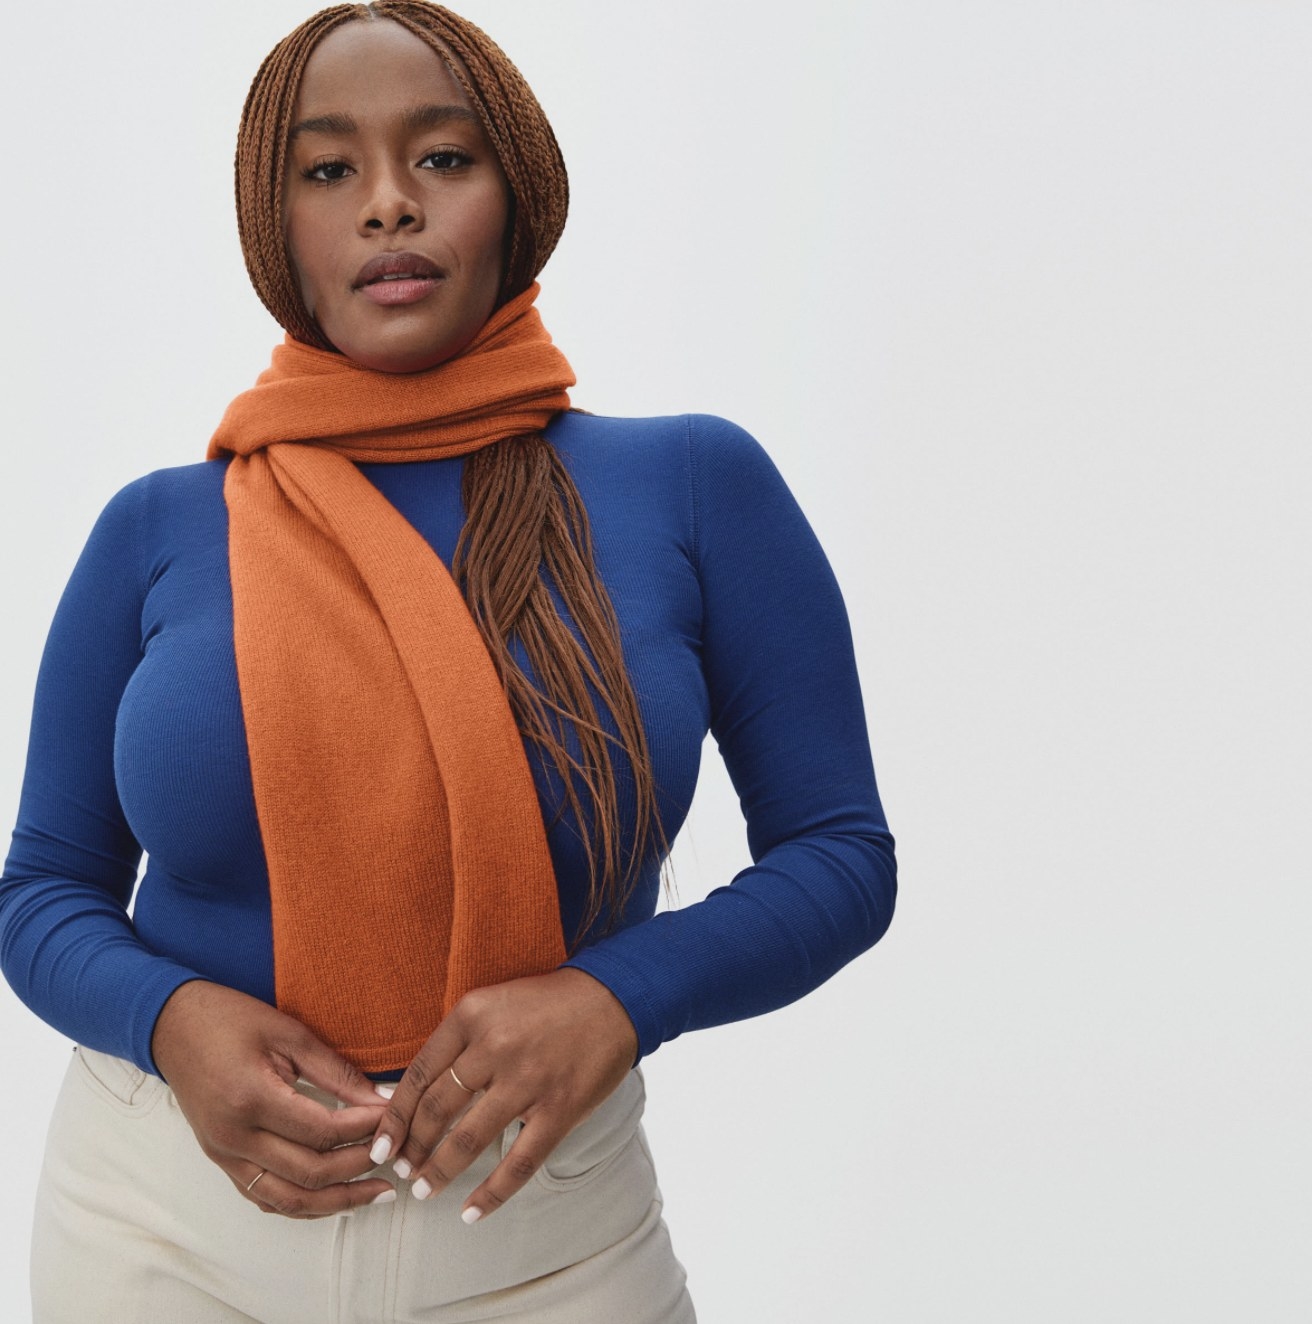 Model wearing the orange scarf wrapped around her neck with a blue long-sleeve